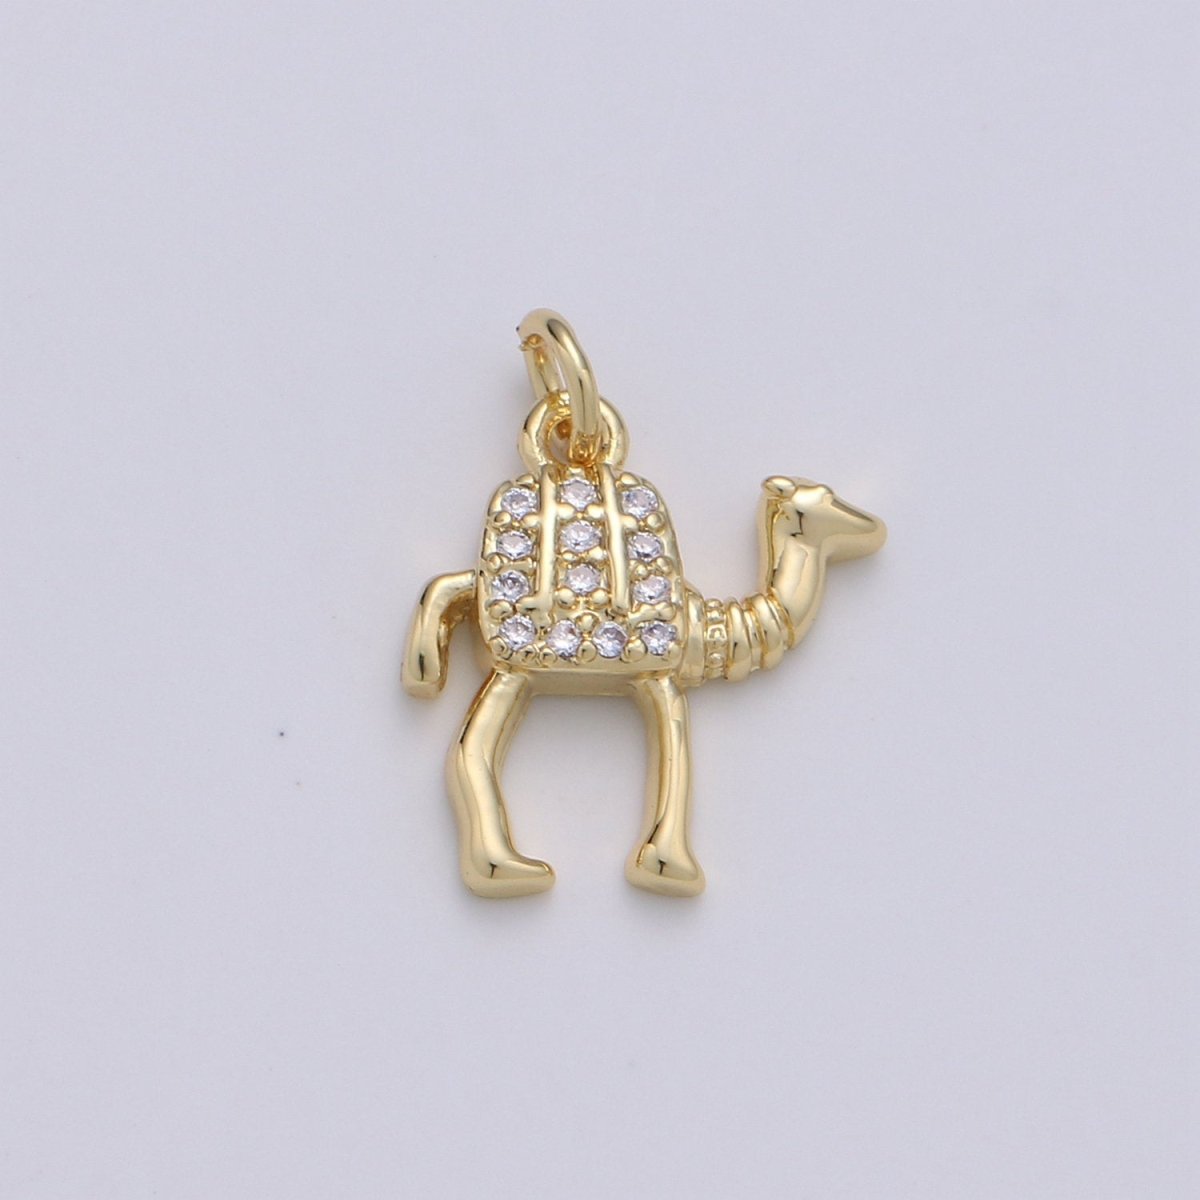 Gold Camel Charm - 14k Gold Filled Camel Pendant - Arabian Desert Charms - Animal Jewelry for Bracelet Necklace Earring Component D-644 - DLUXCA